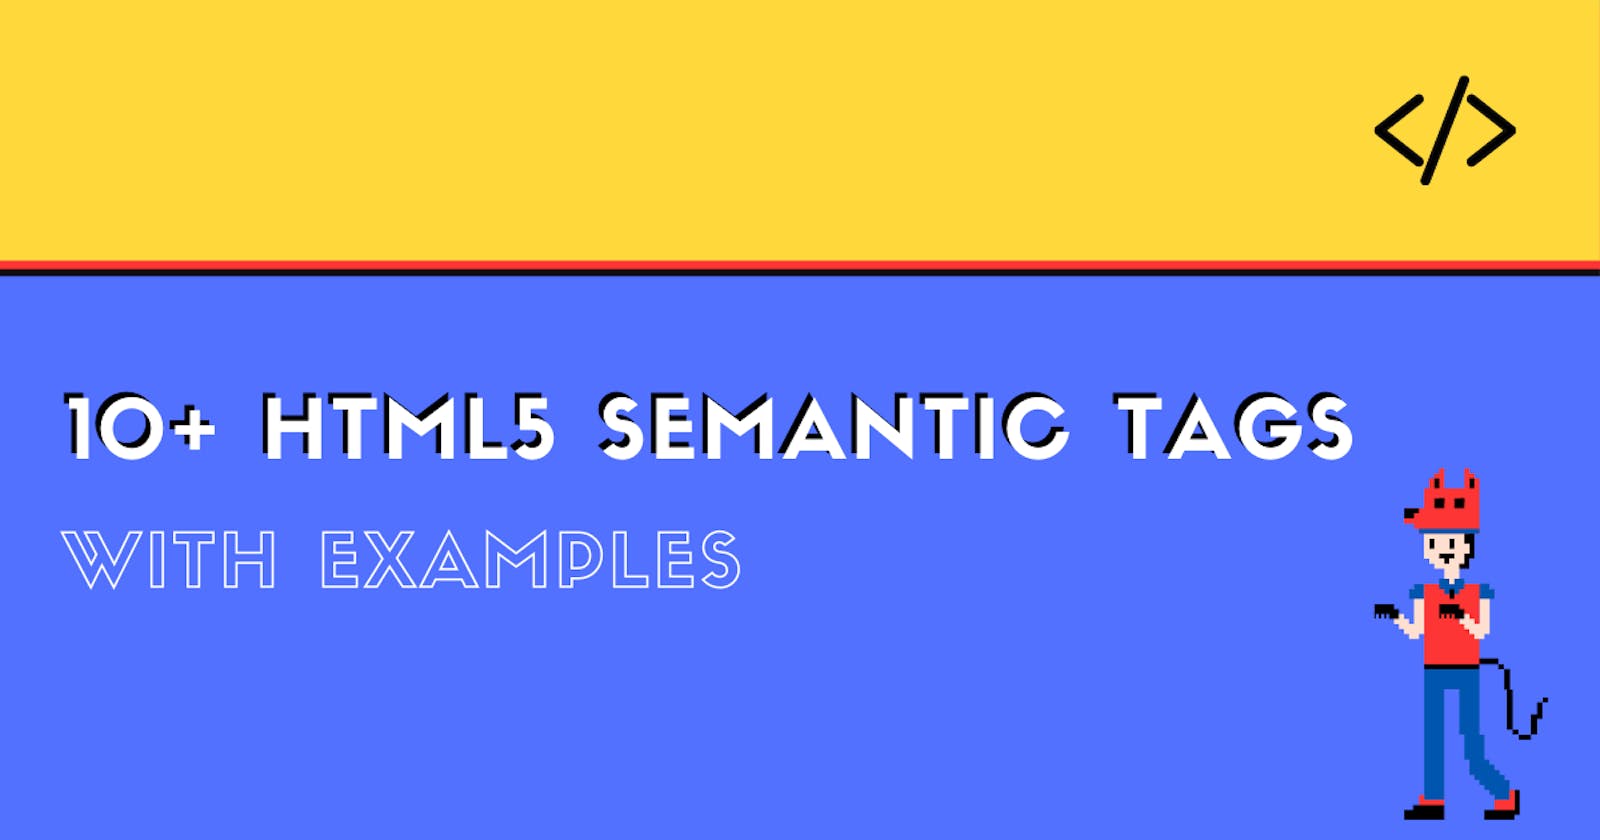 10+ HTML5 Semantic tags with examples.